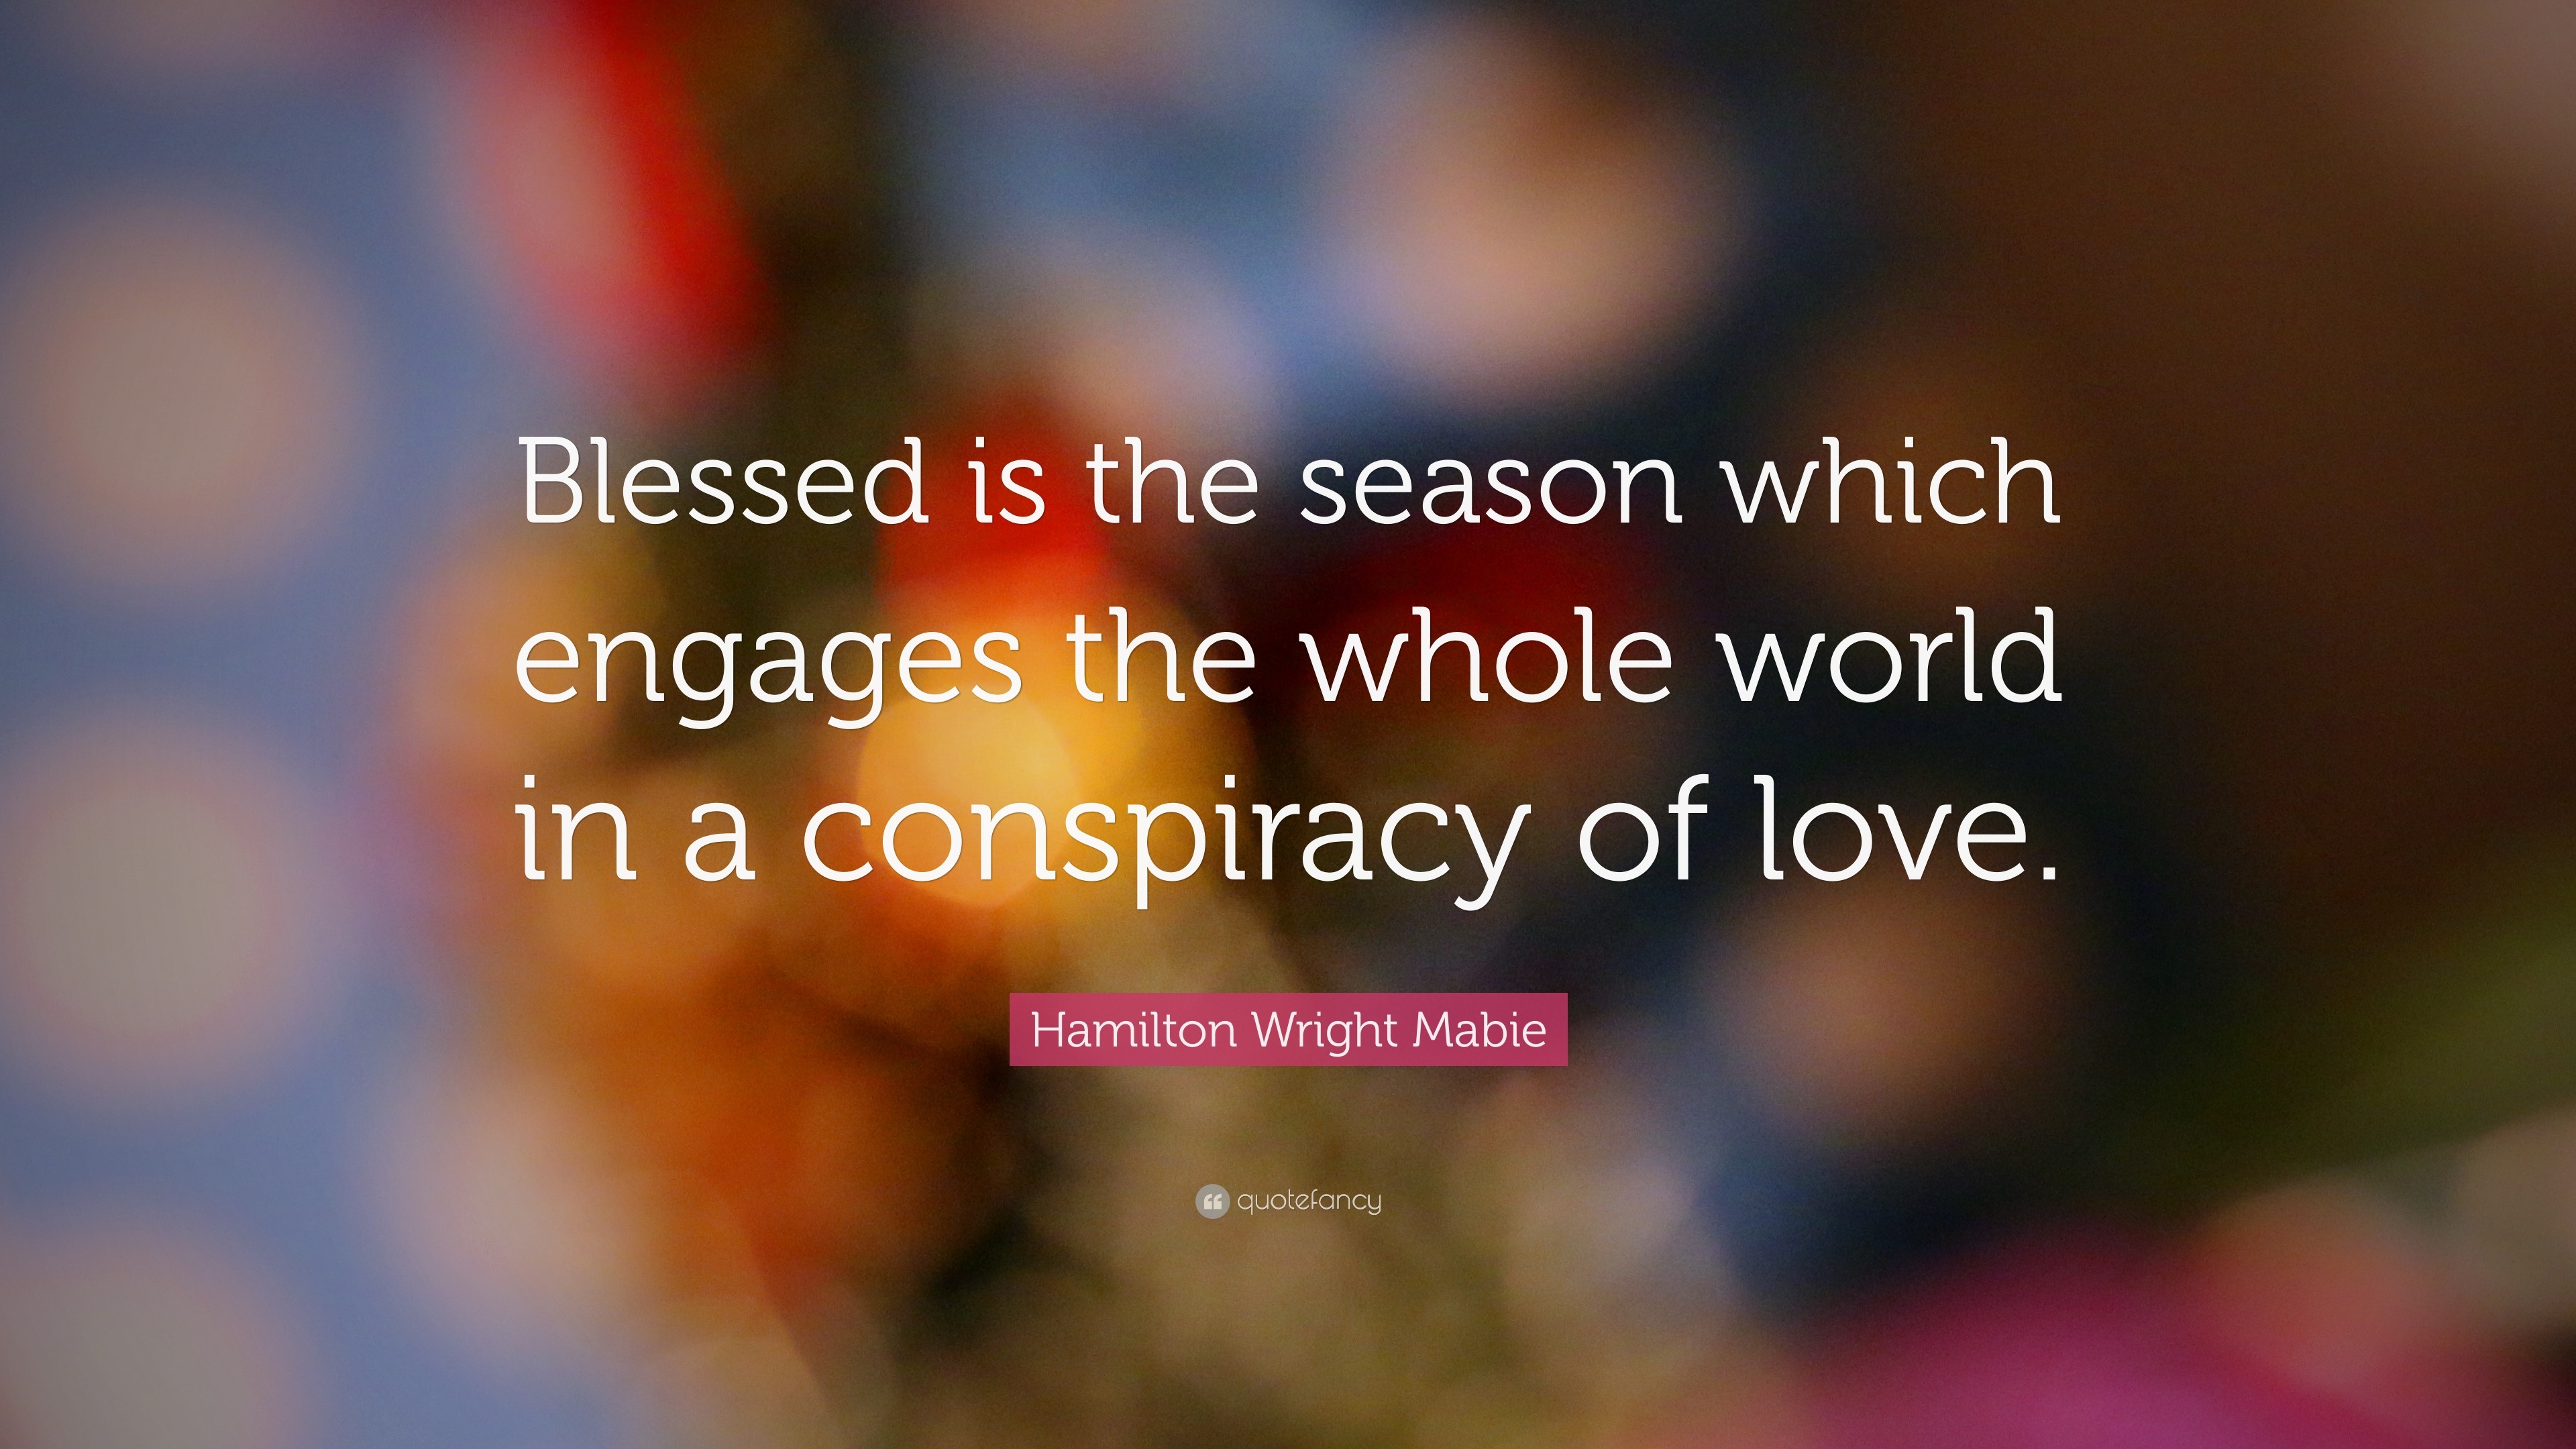 Christmas Quotes “Blessed is the season which engages the whole world in a conspiracy